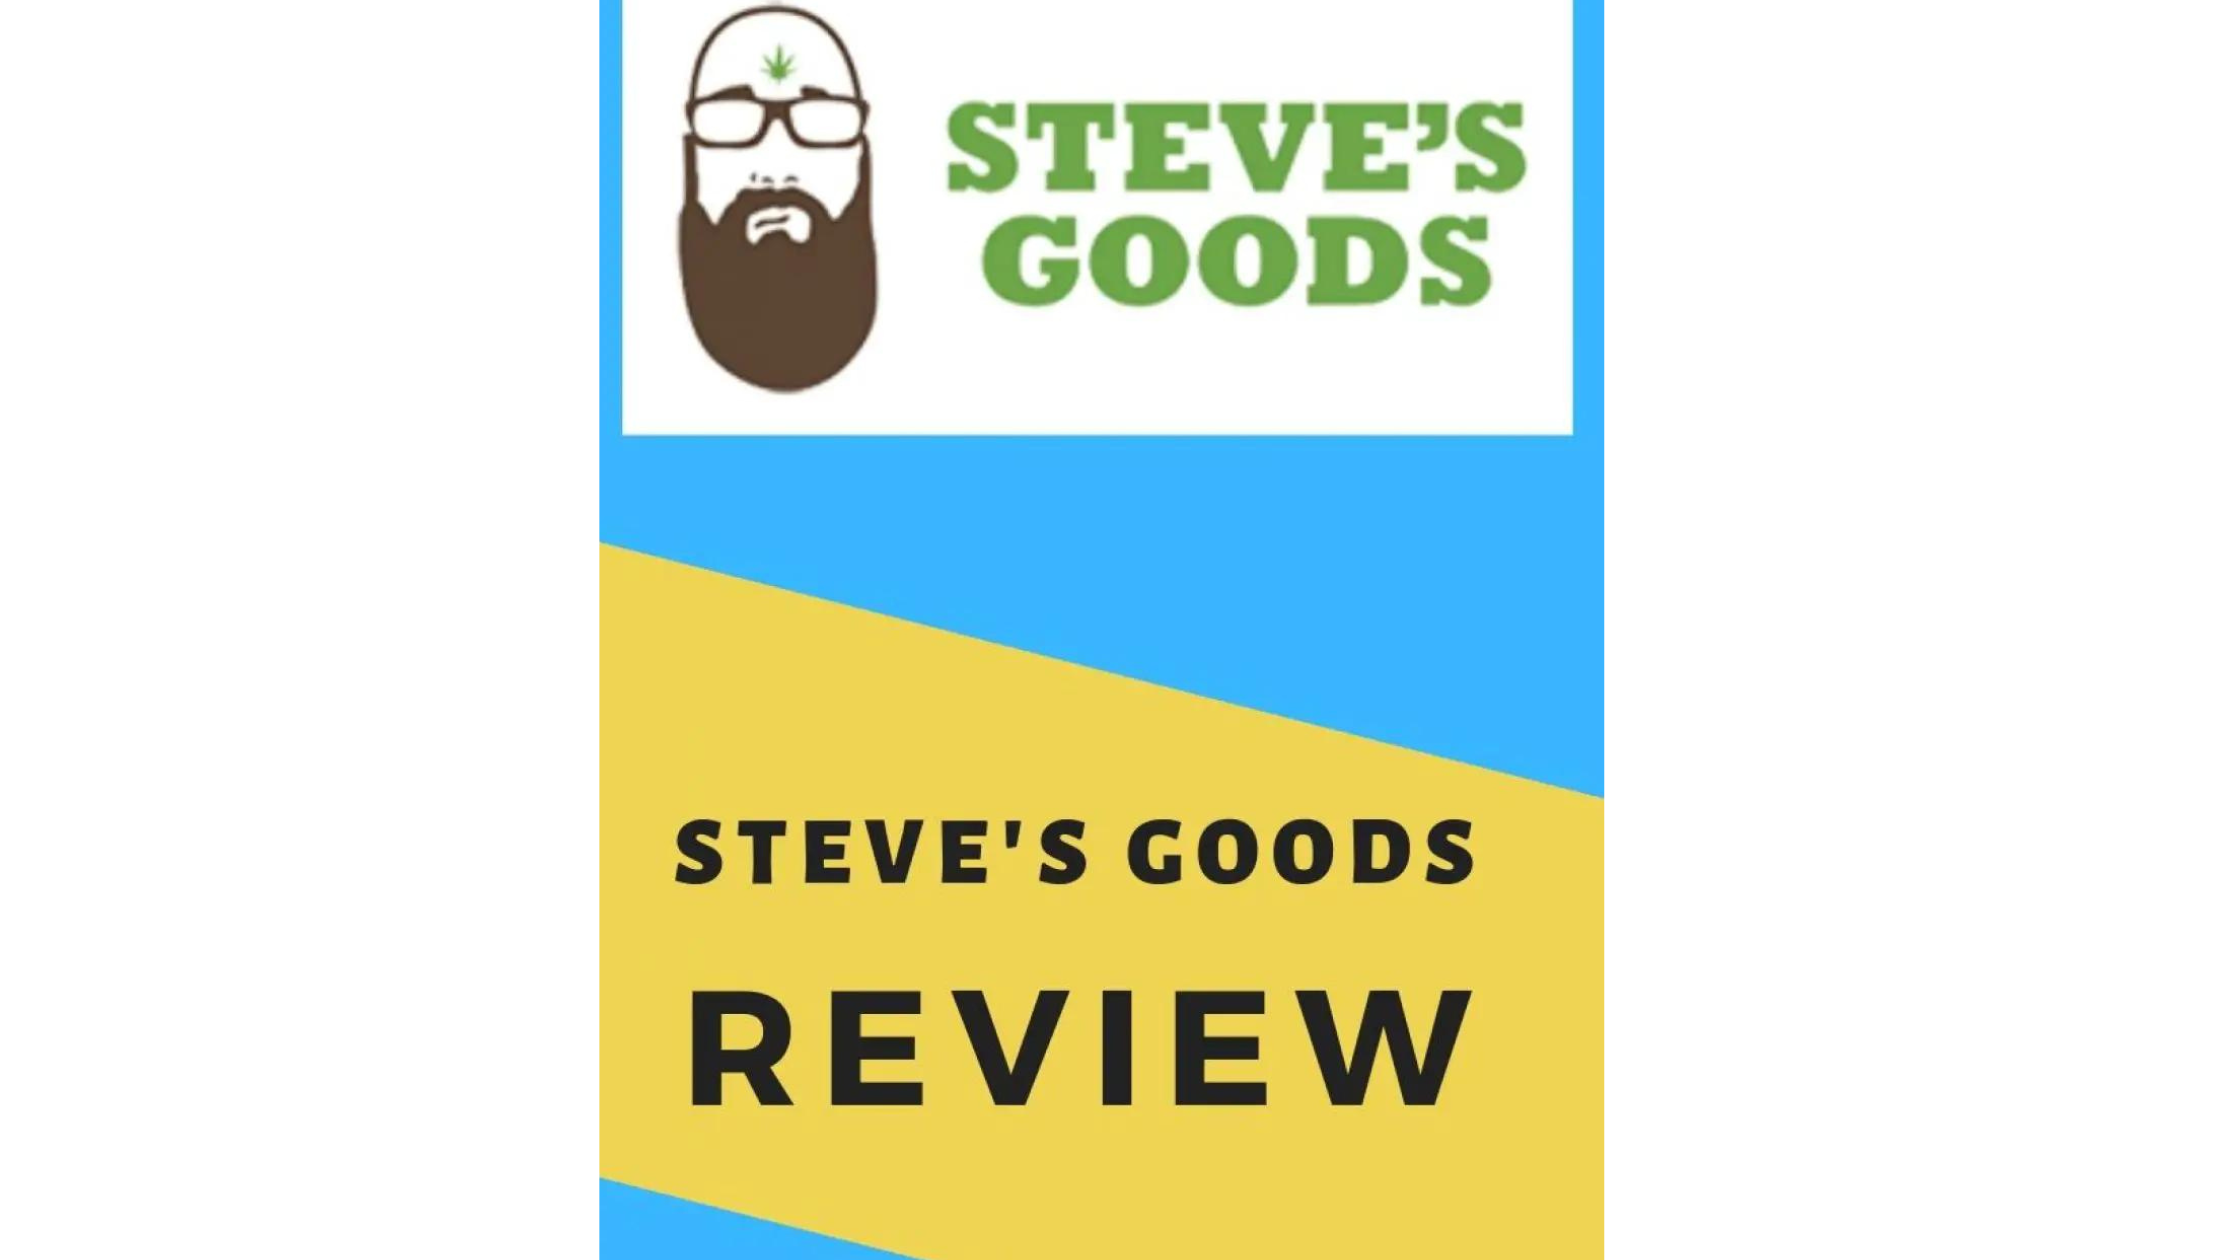 Steve’s Goods Reviewed: Here is Steve Good Blog about Their Pros and Cons